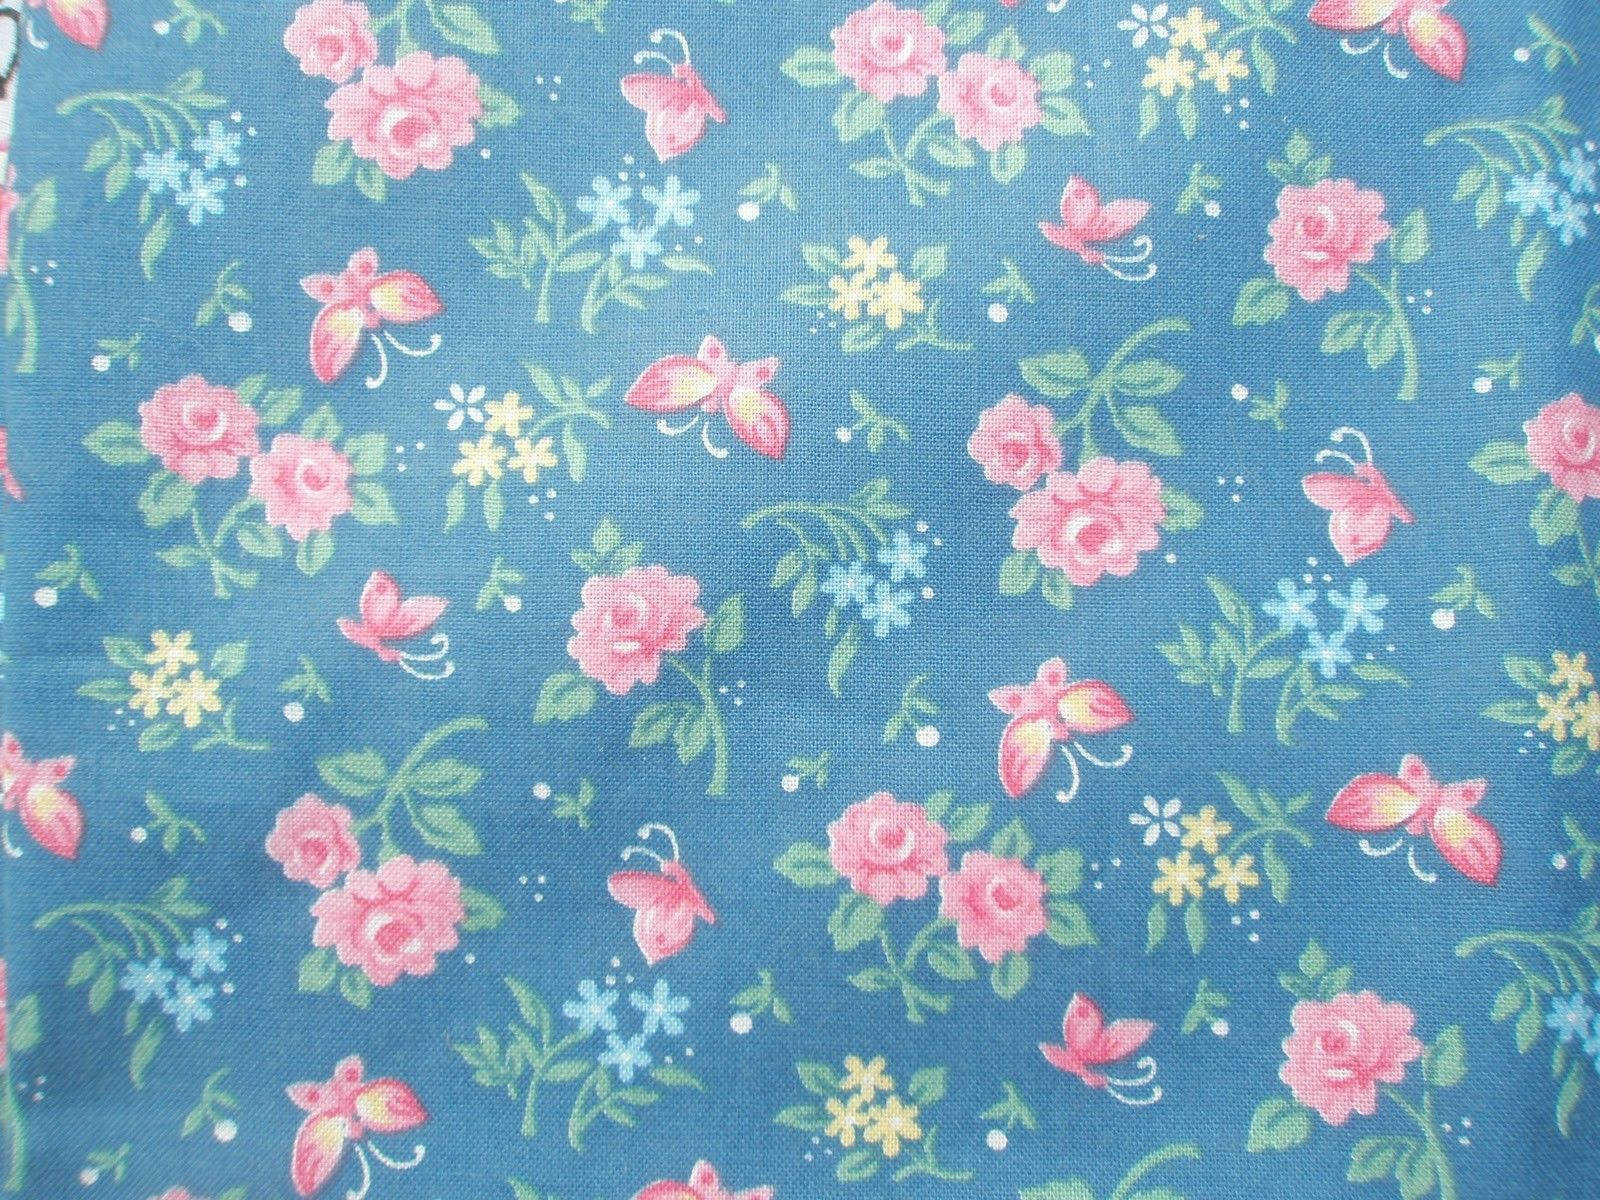 Cute Girly Floral Wallpaper